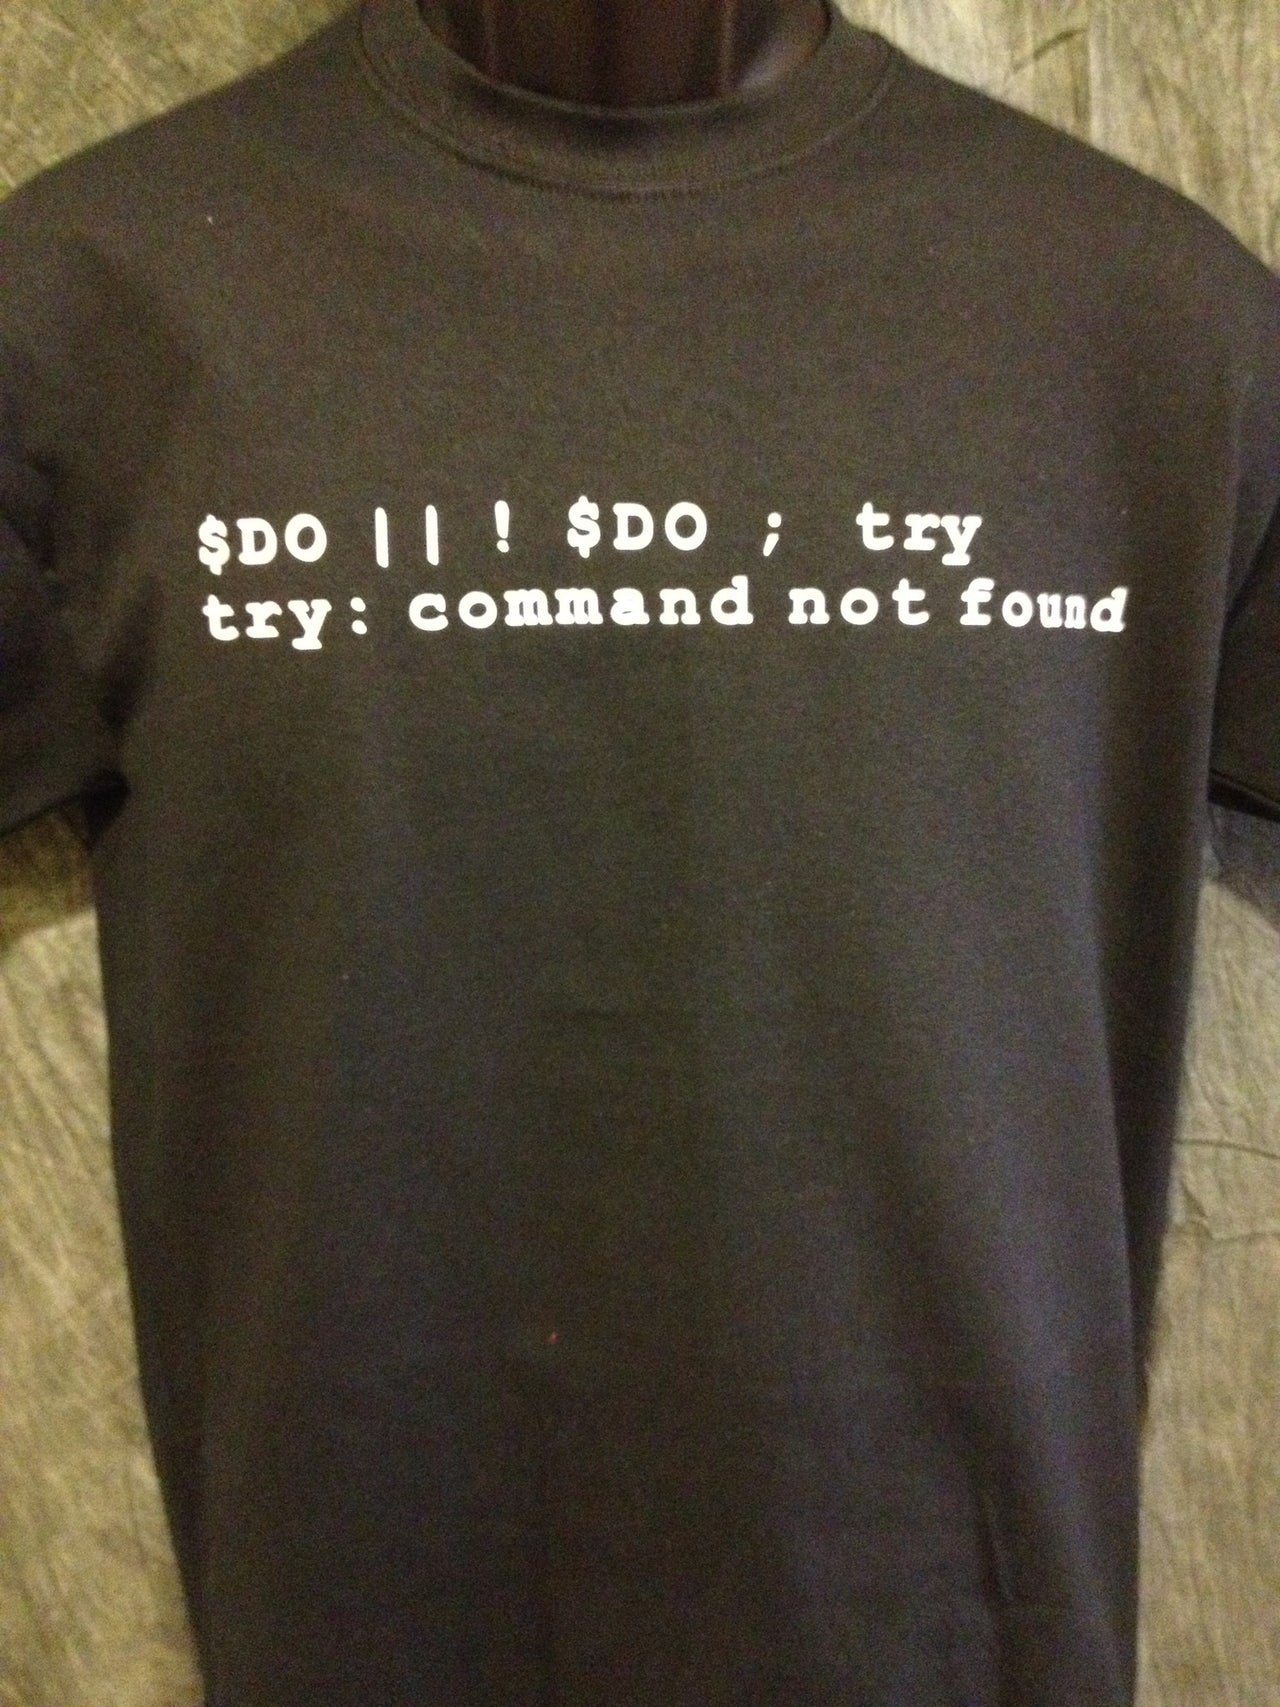 Do or Do Not; There is no Try (Computer Code Yoda Expression of Speech) Tshirt: Black With White Print - TshirtNow.net - 1